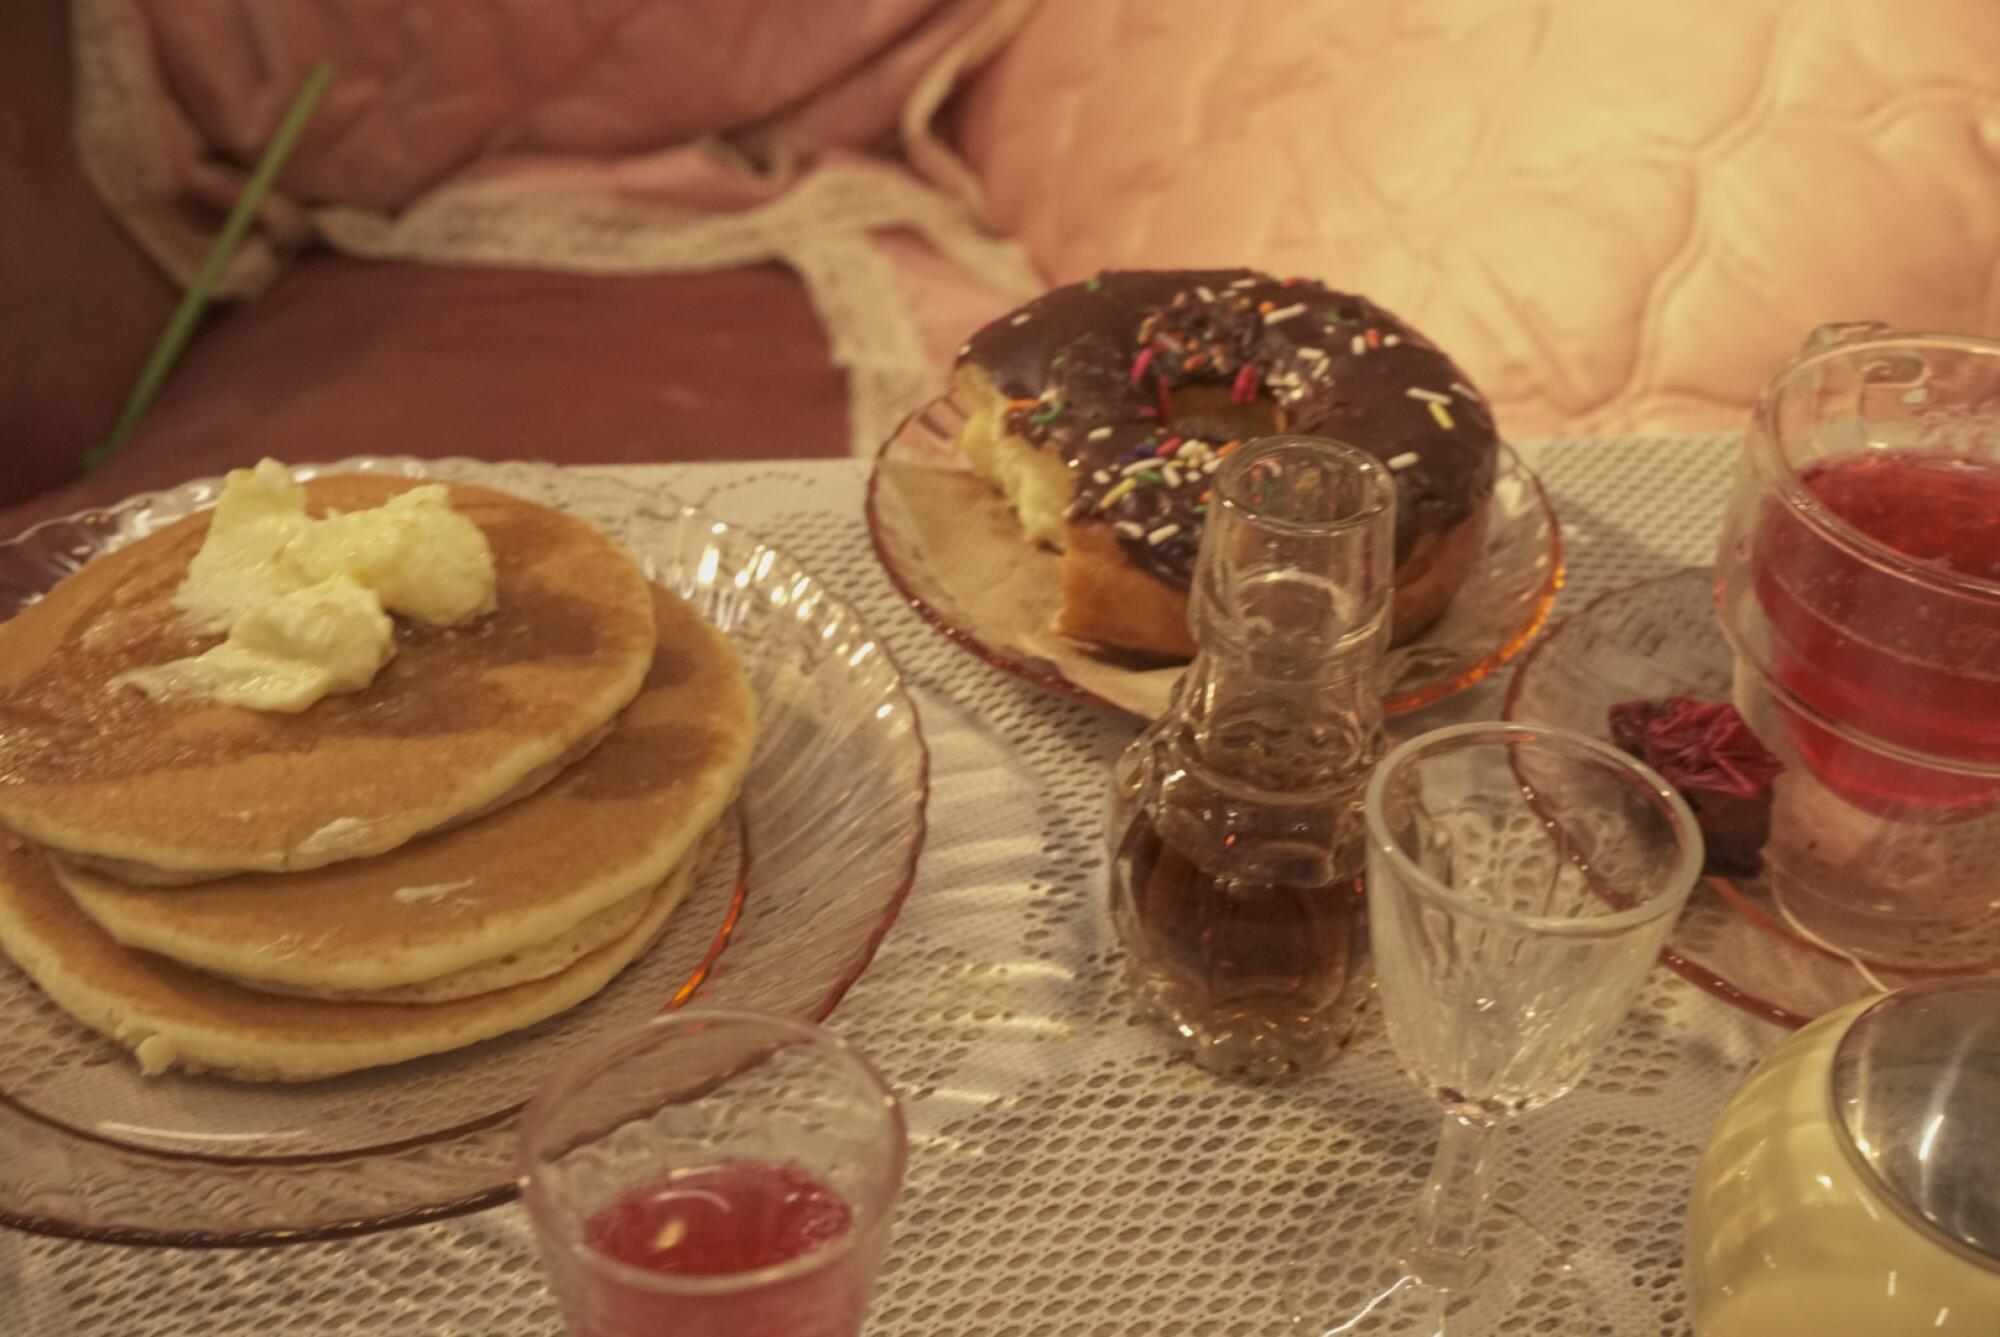 A closeup of pancakes, a chocolate doughnut and glassware on a table.